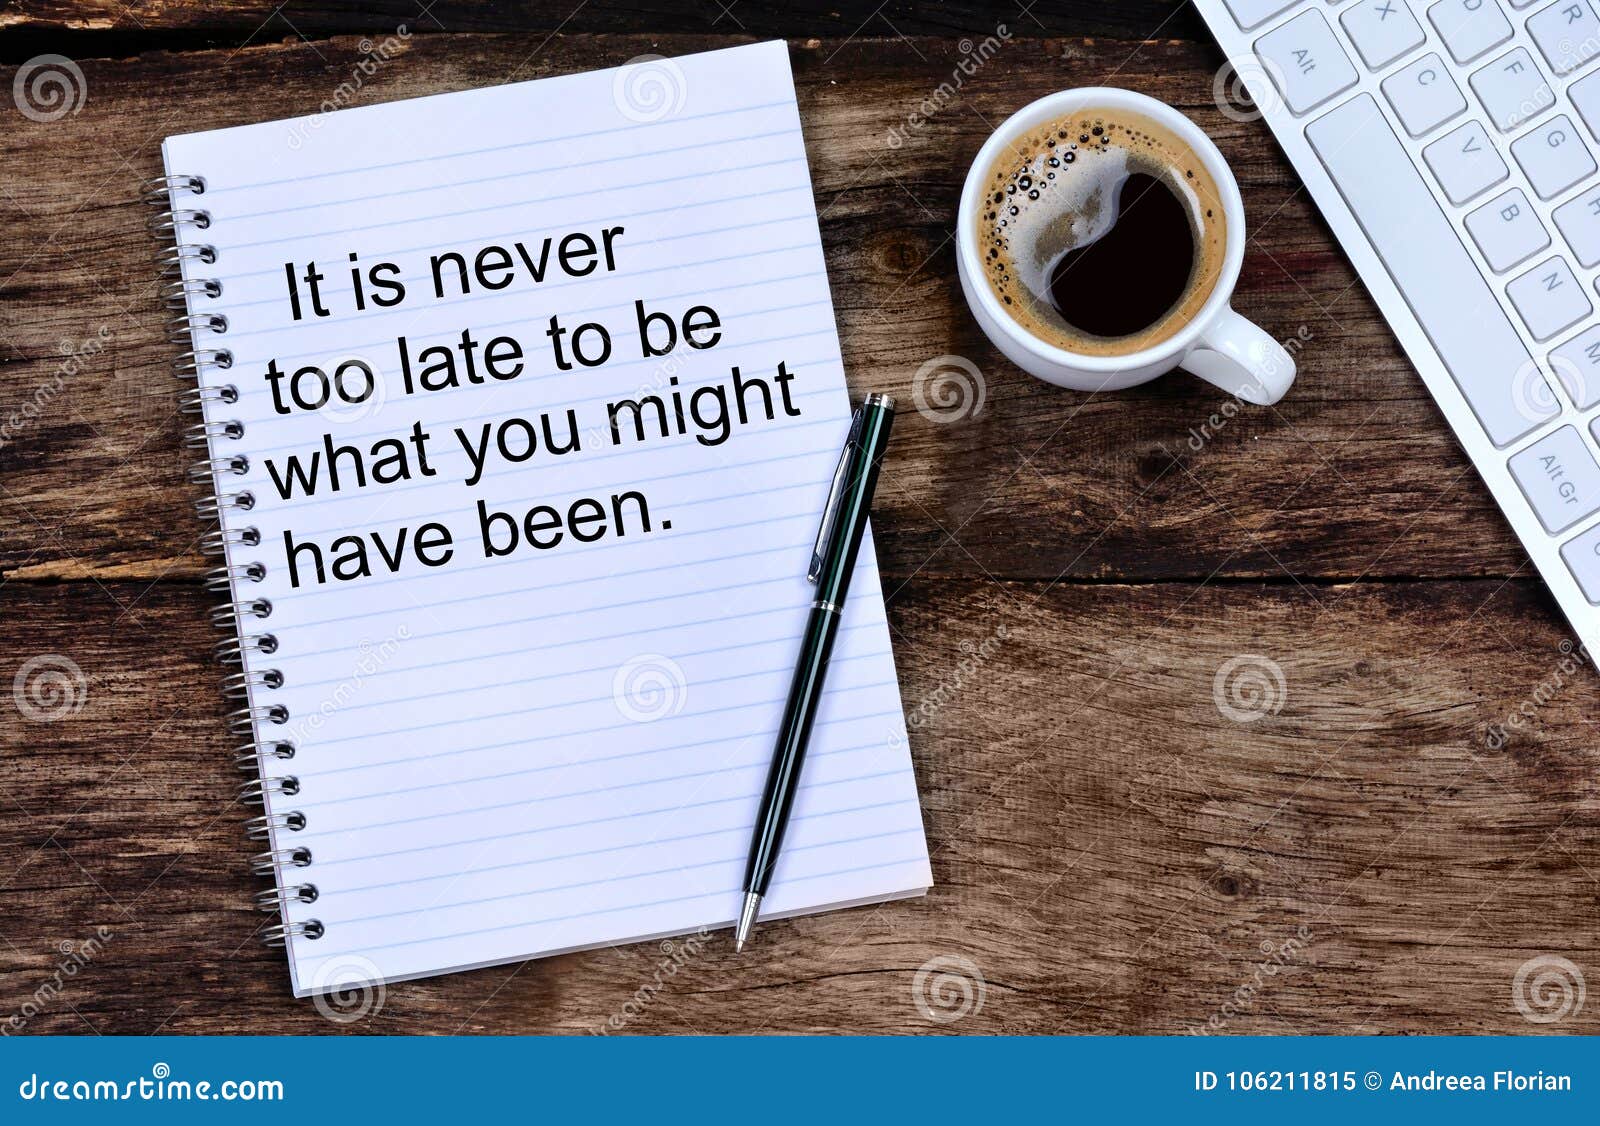 it is never too late to be what you might have been. inspirational quote